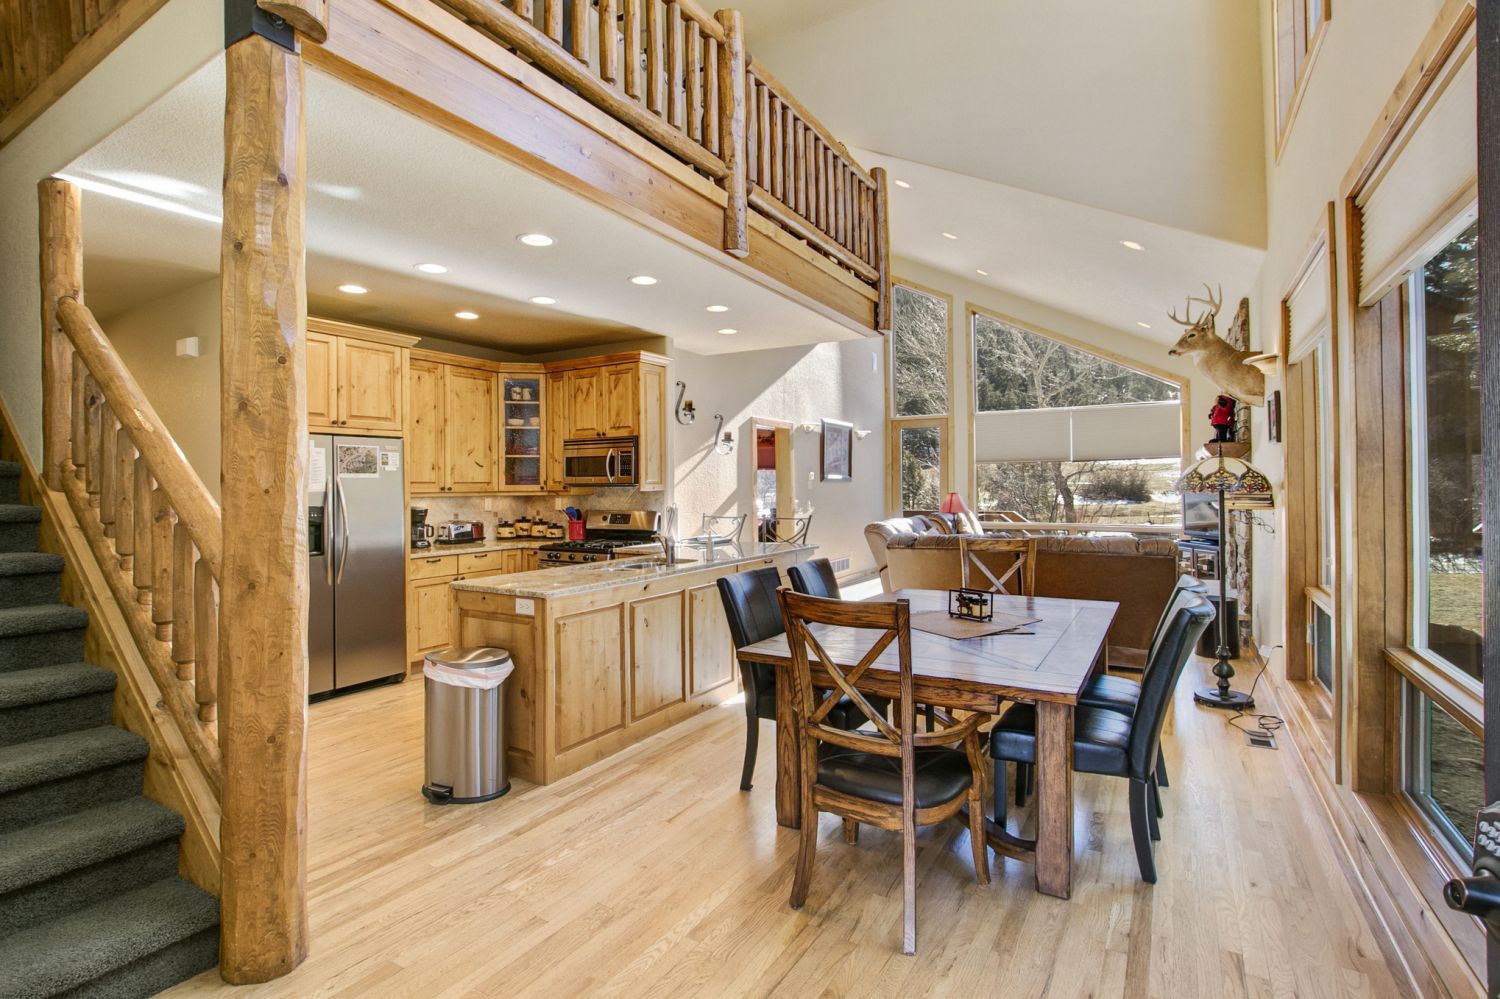 Tranquility on the River Four - Enter into the open concept kitchen, dining, living area with beautiful cathedral ceilings